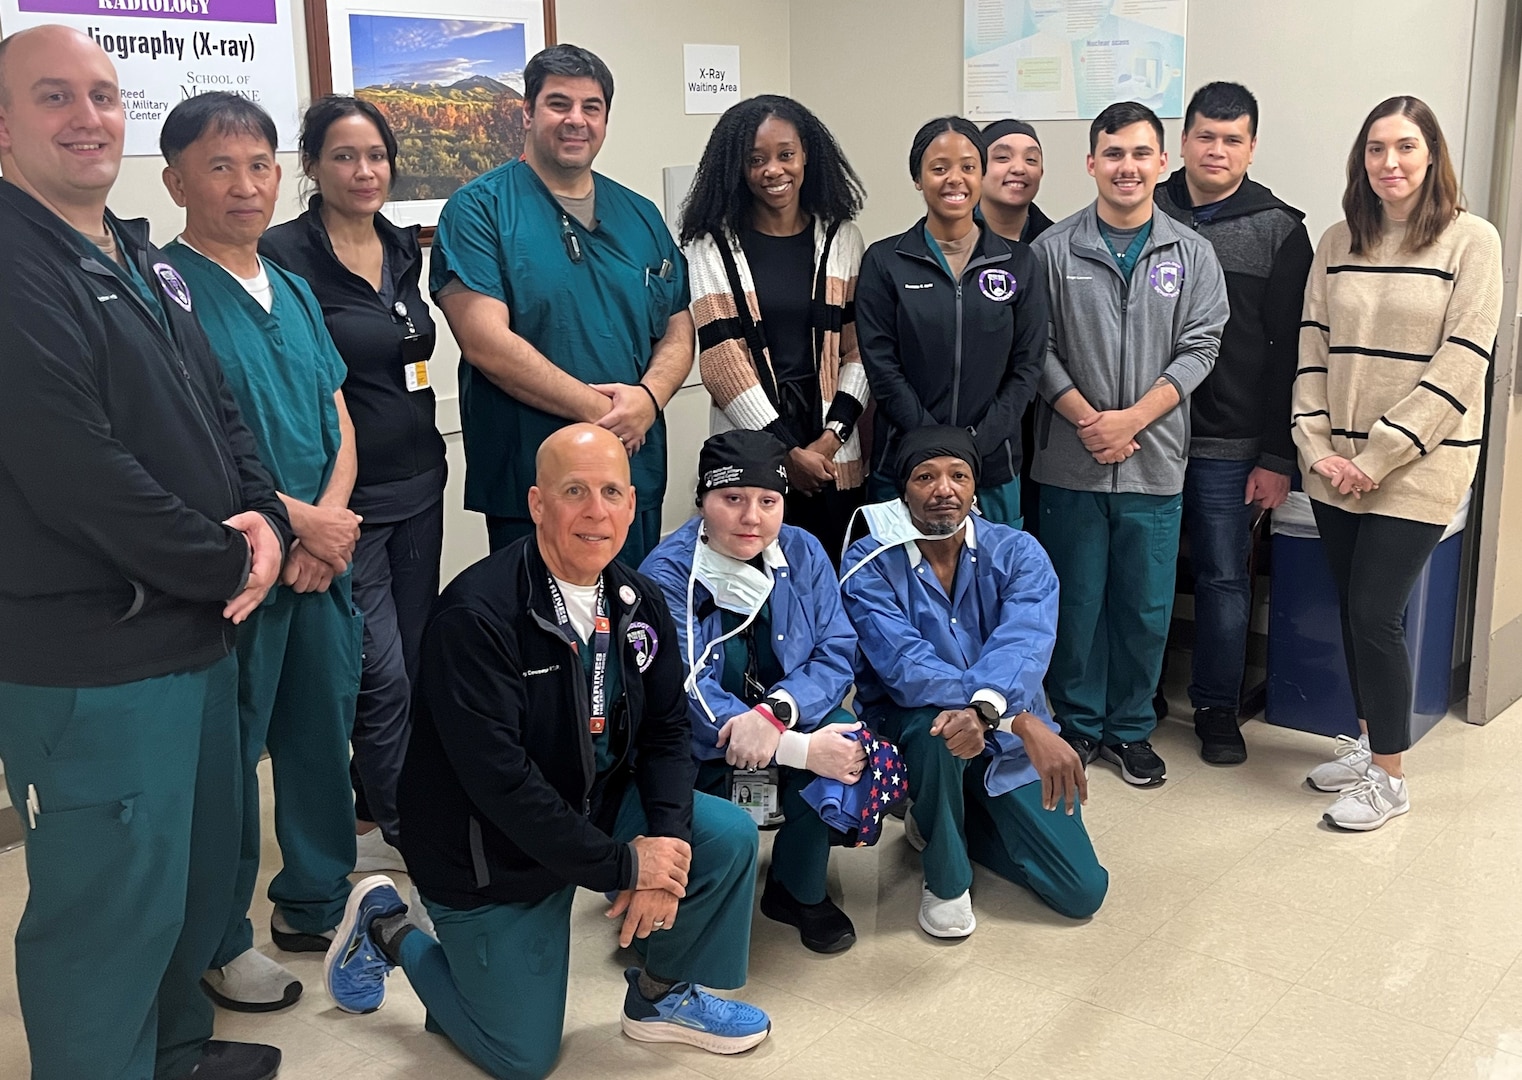 Some of the radiologic technologists at Walter Reed National Military Medical Center who play a huge role in the safe, quality health care delivered at WRNMMC.